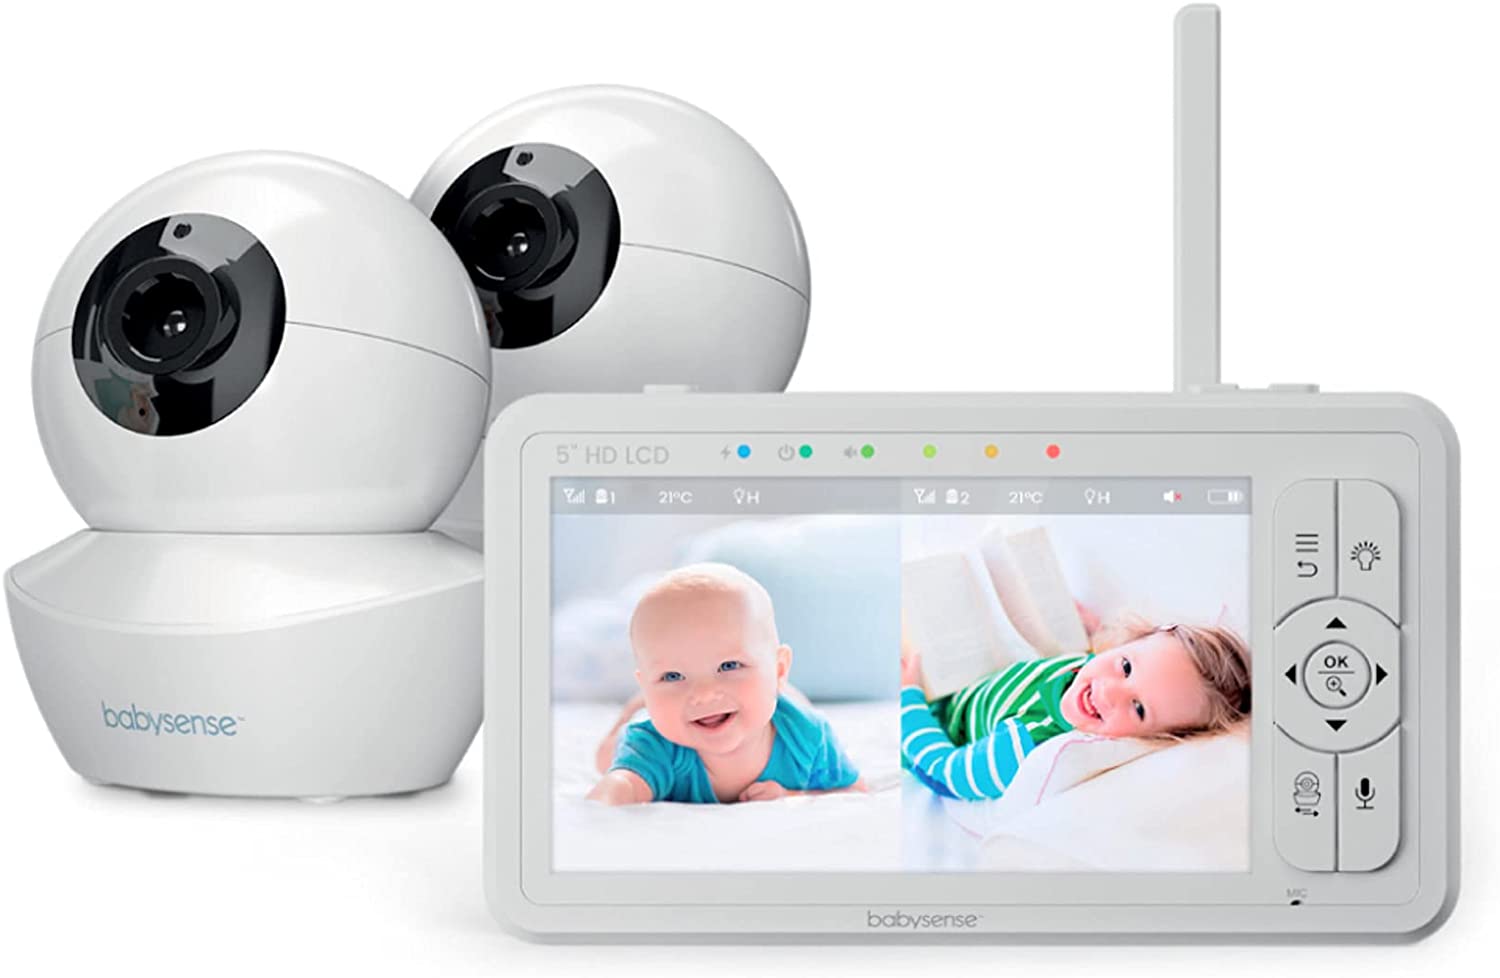 Top 5 Best baby monitor with Wifi and 2 cameras - Babysense 4.3 Split Screen Baby Monitor